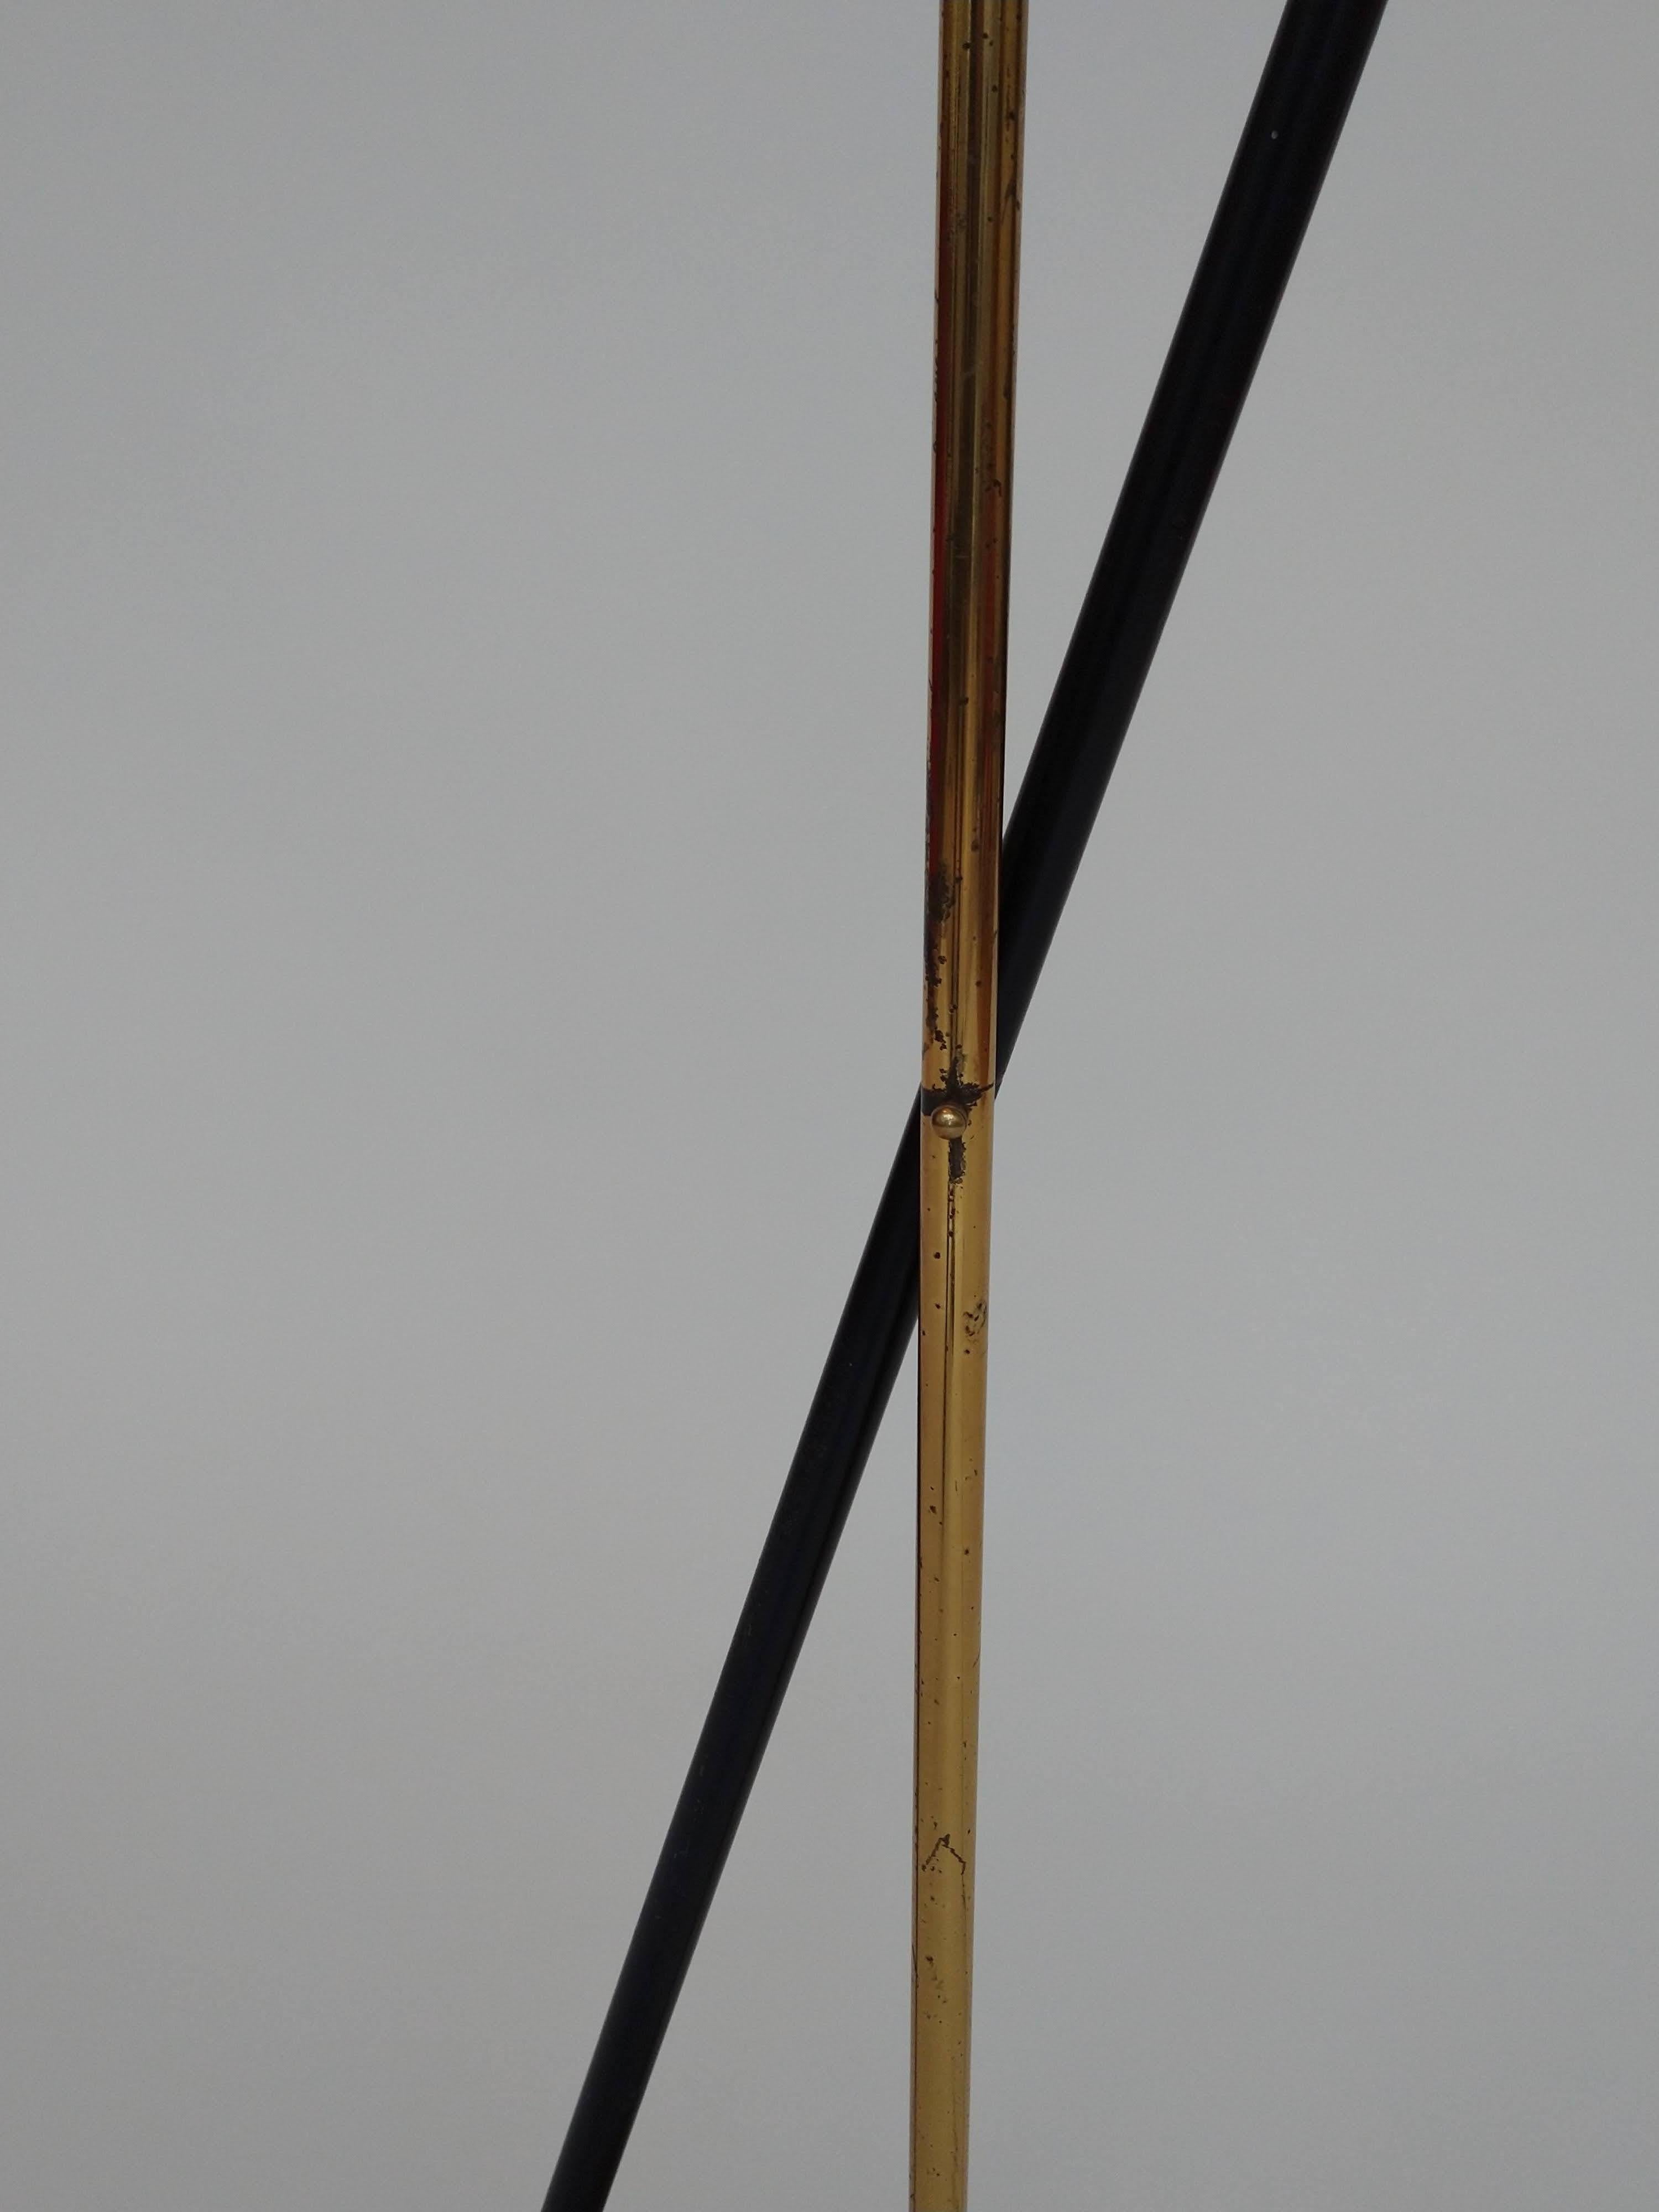 Italian Sculptural Brass and Steel Floor Lamp Attributed to Gilardi & Barzaghi